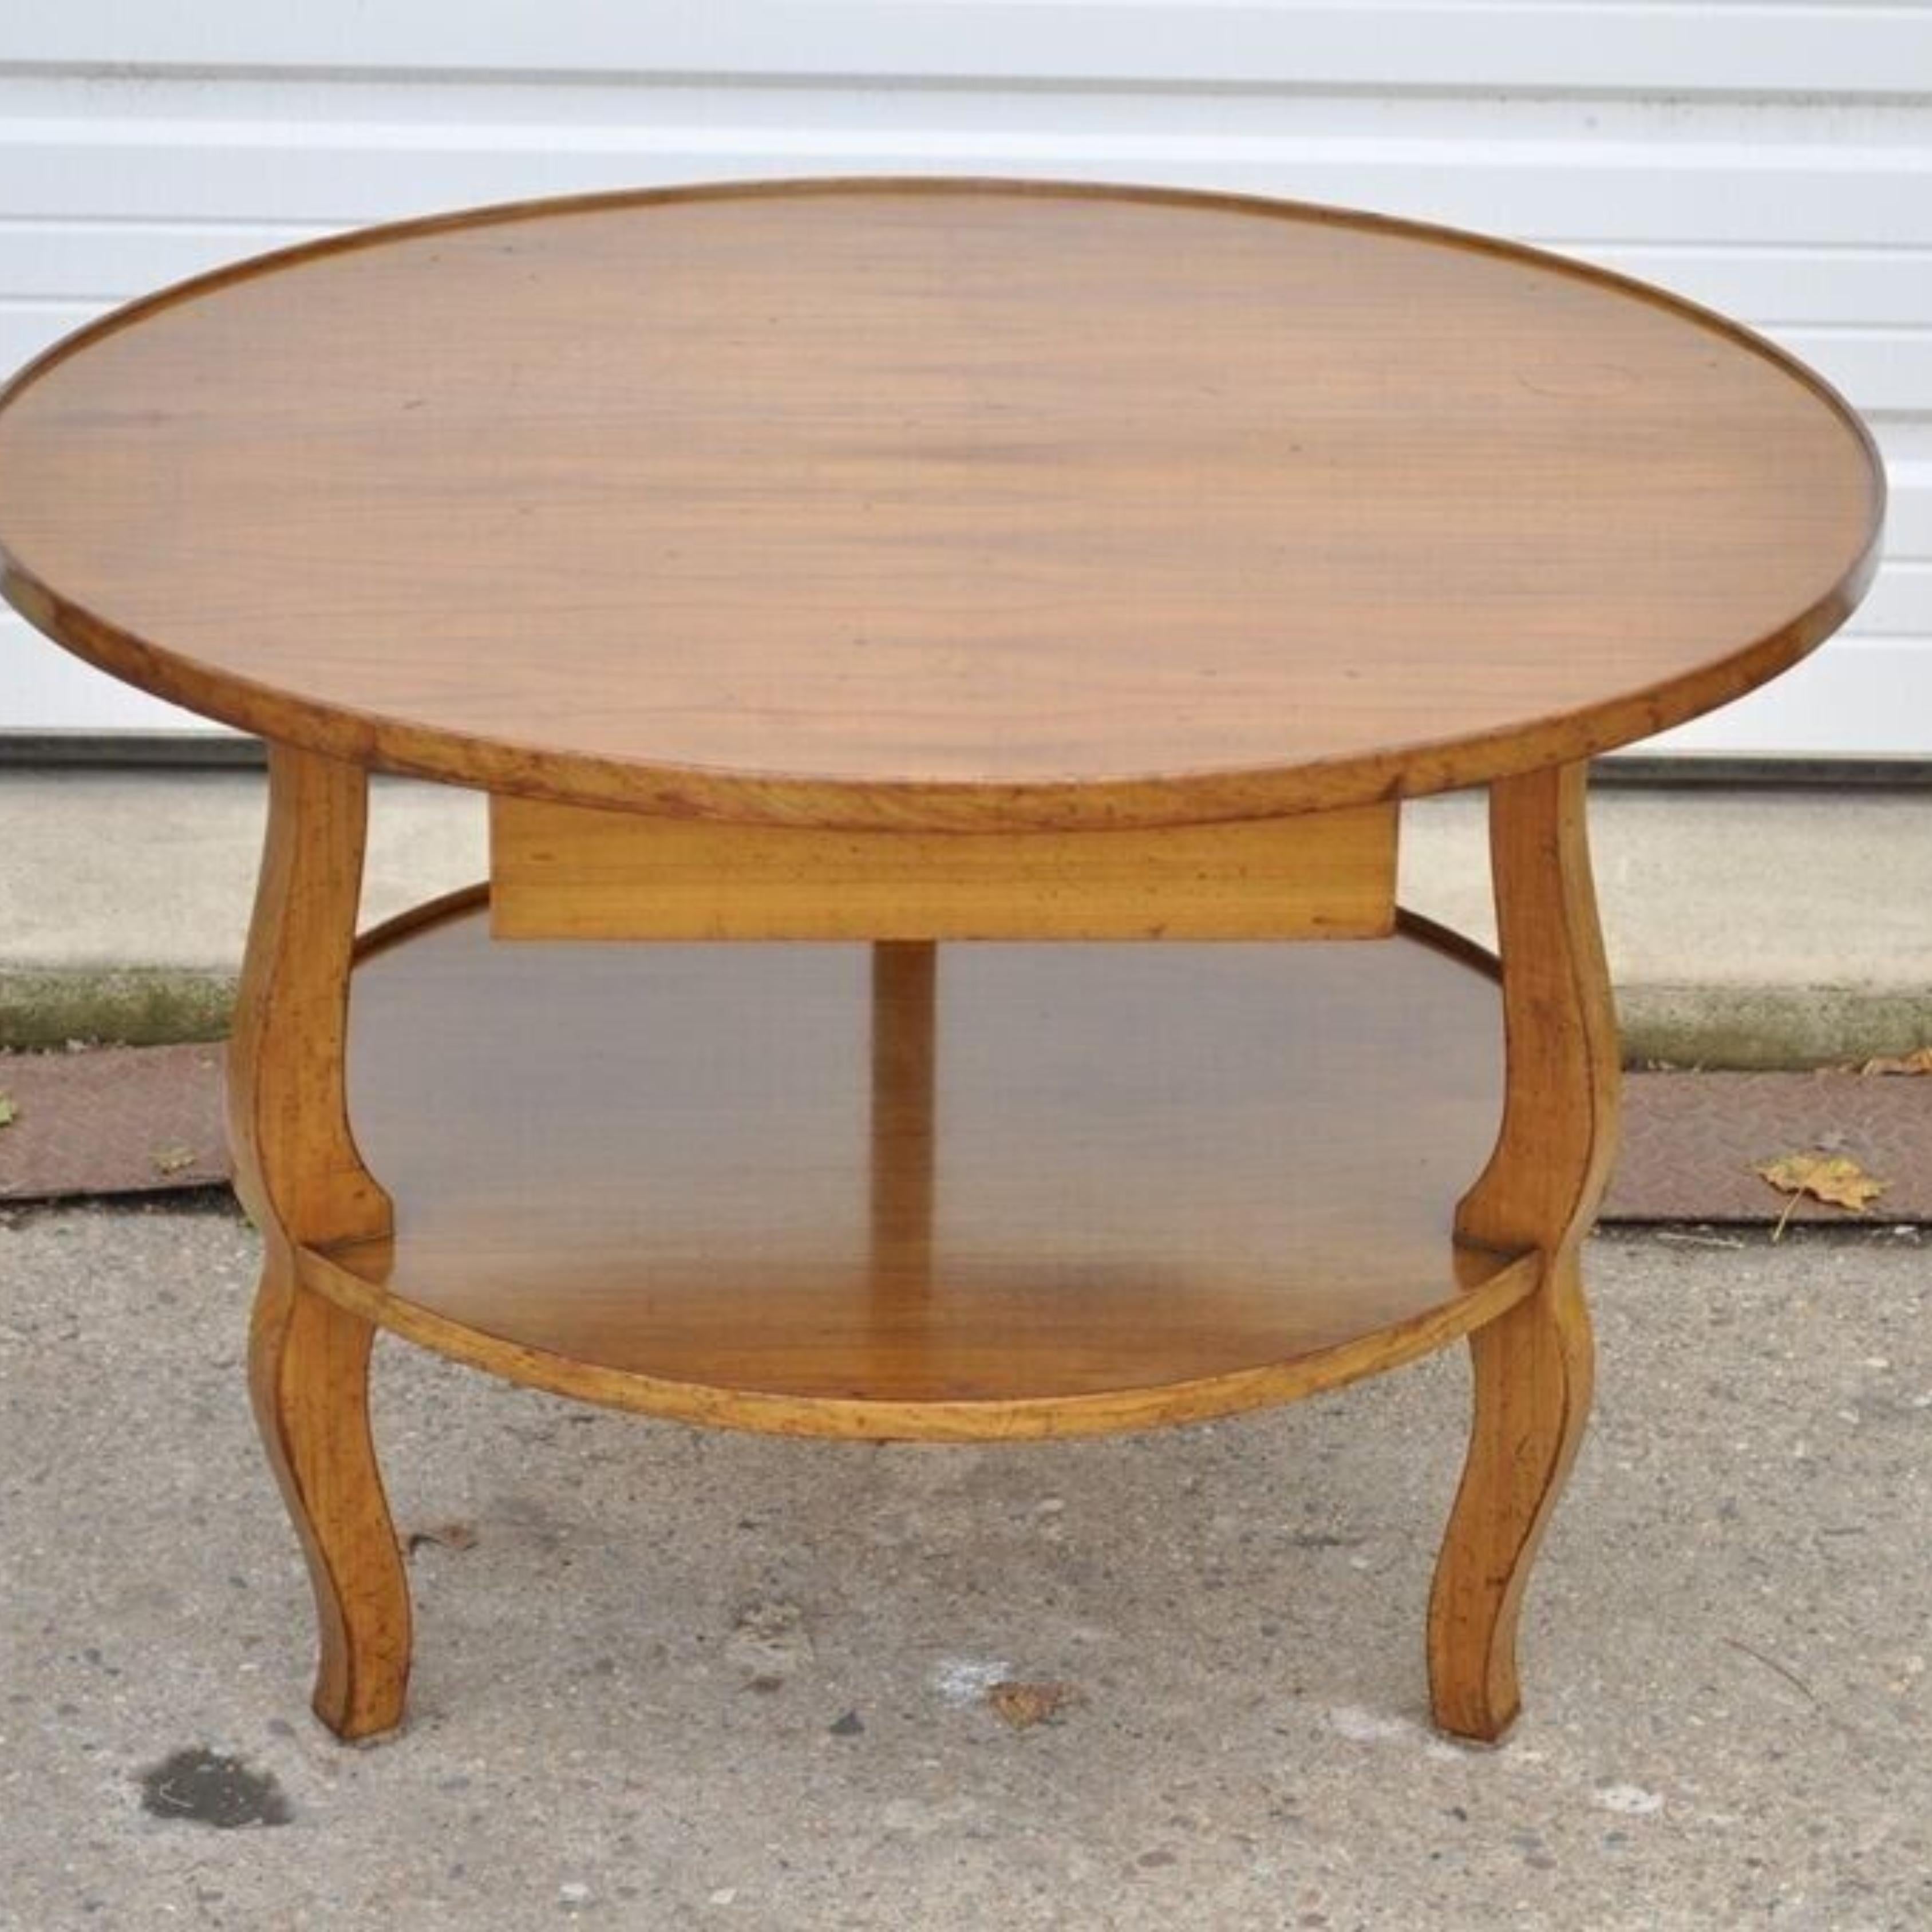 Vintage French Country Provincial Round Cherry Occasional Side Table with Drawer. Item featured has nice cabriole legs, dovetailed drawer, very nice vintage item. Circa Mid 20th Century. Measurements: 24